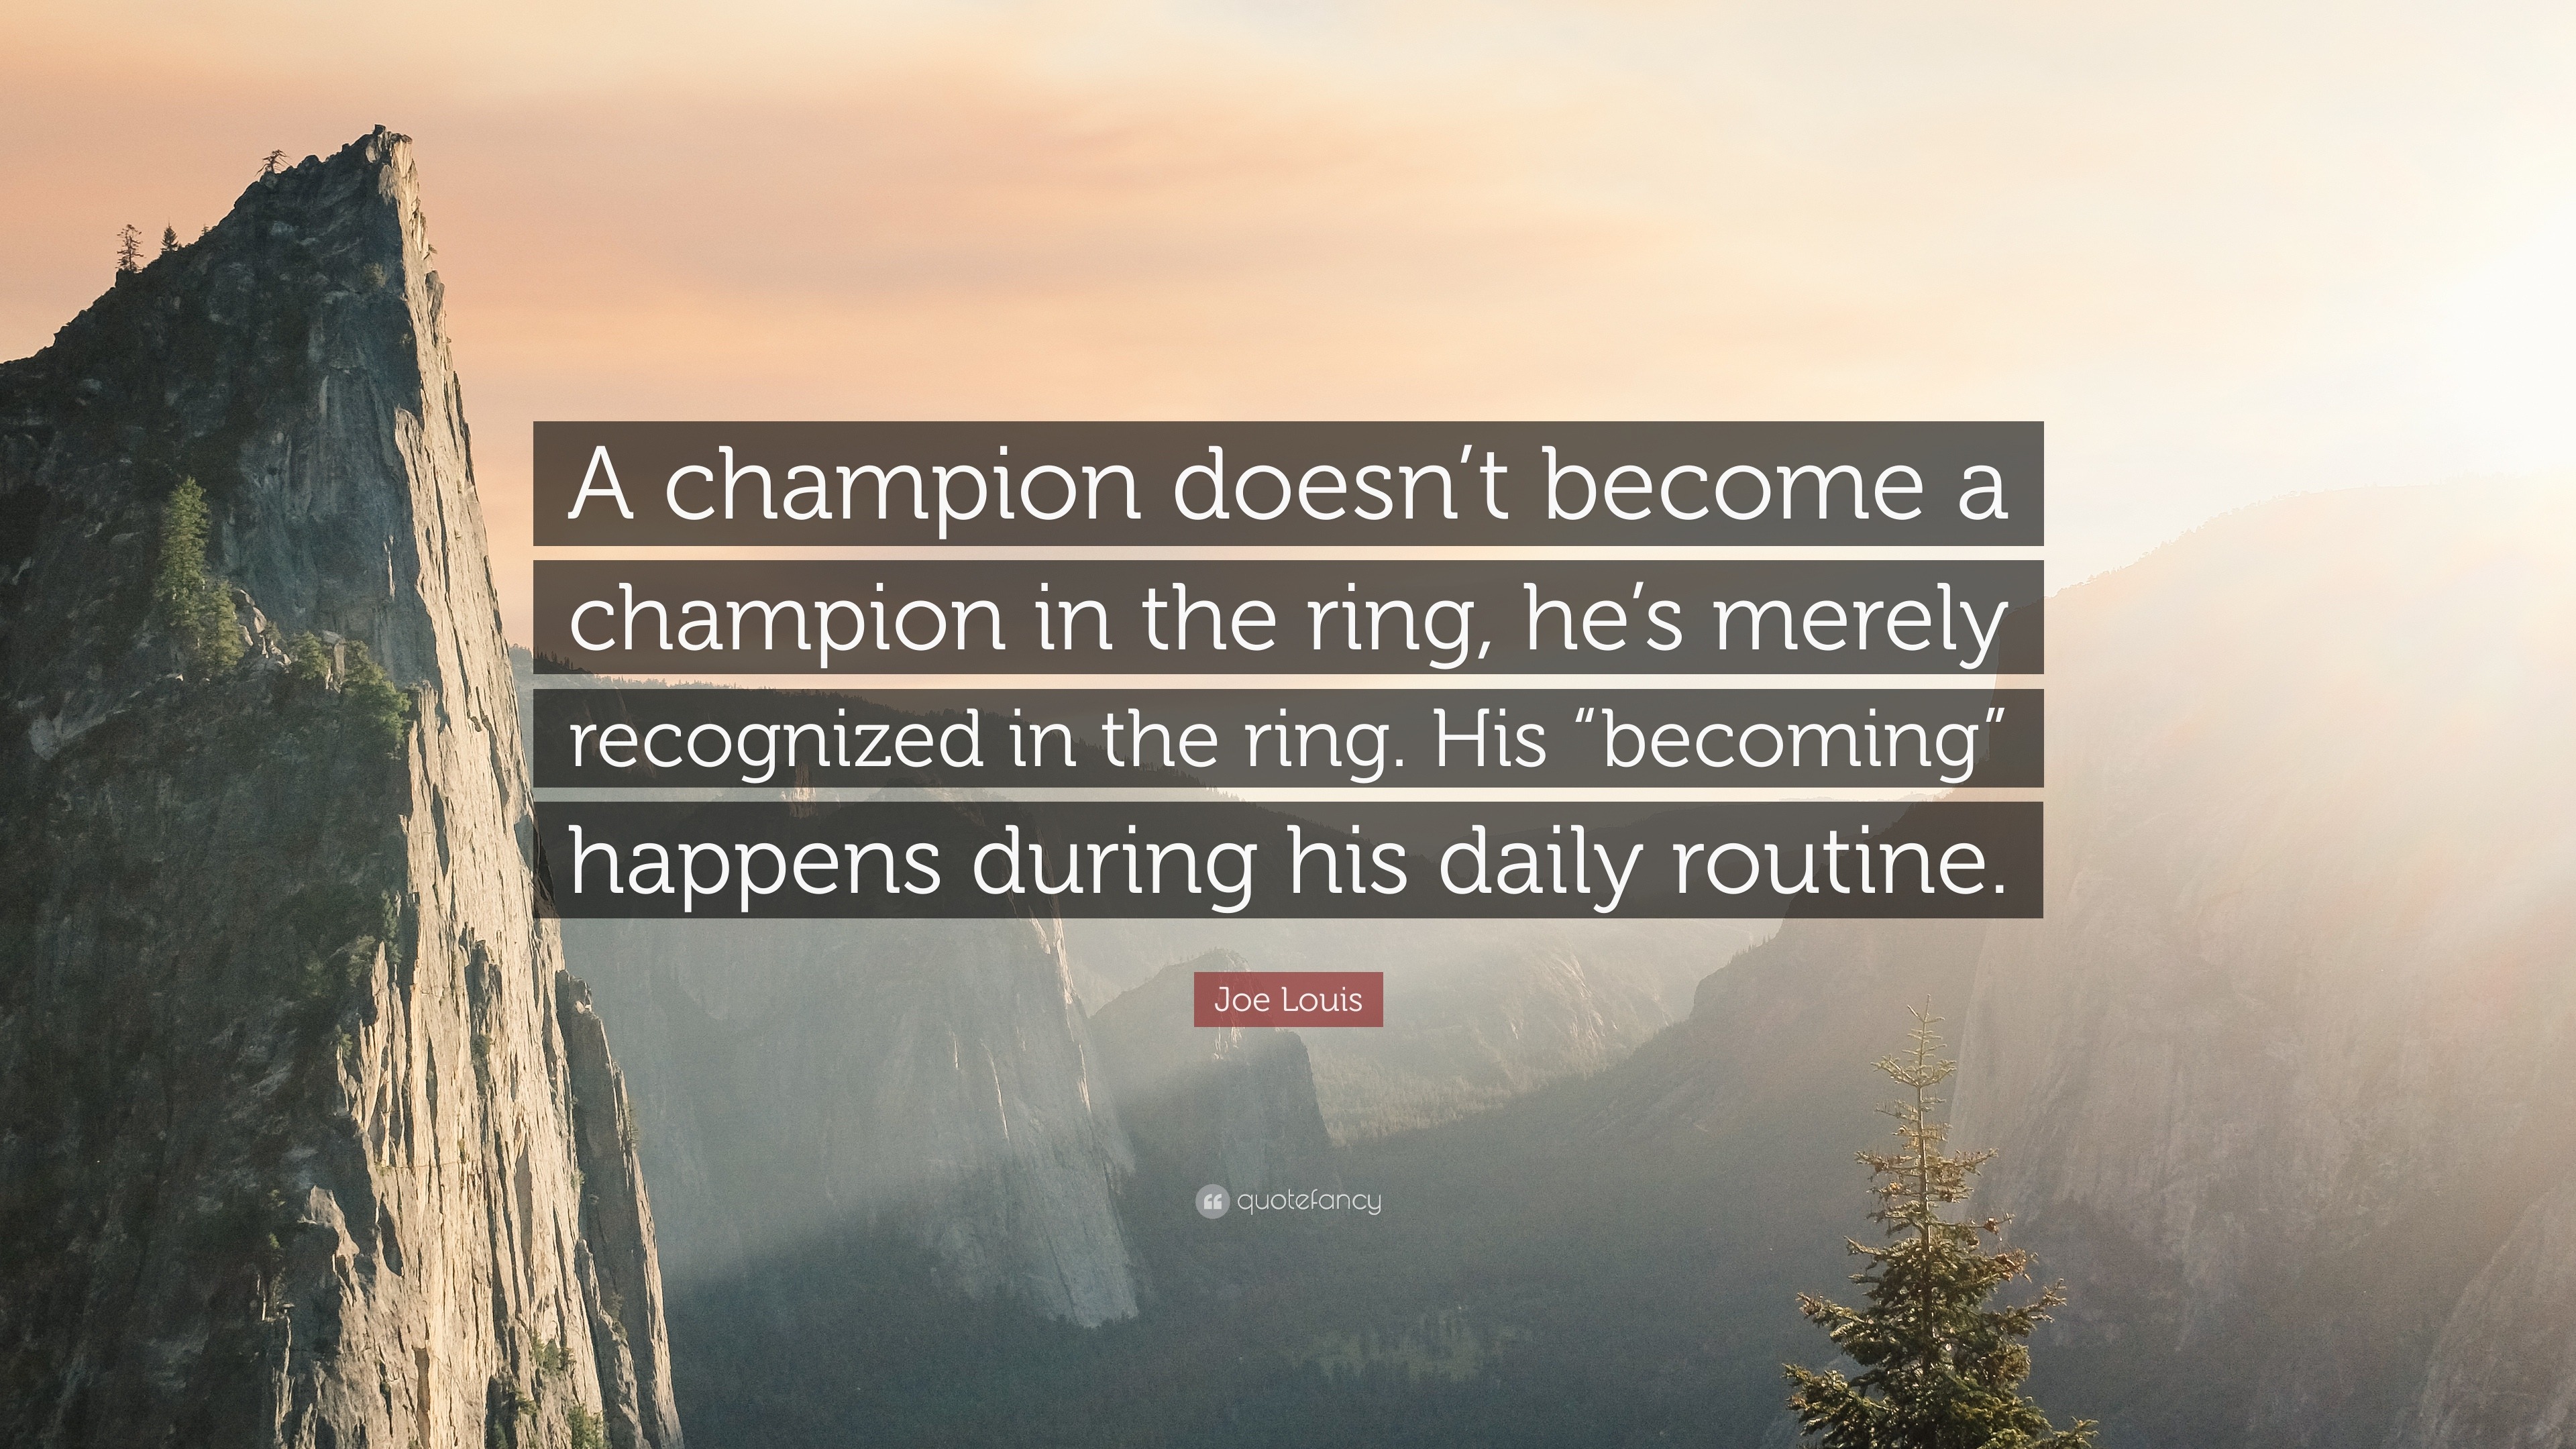 Joe Louis Quote: "A champion doesn't become a champion in the ring, he's merely recognized in ...